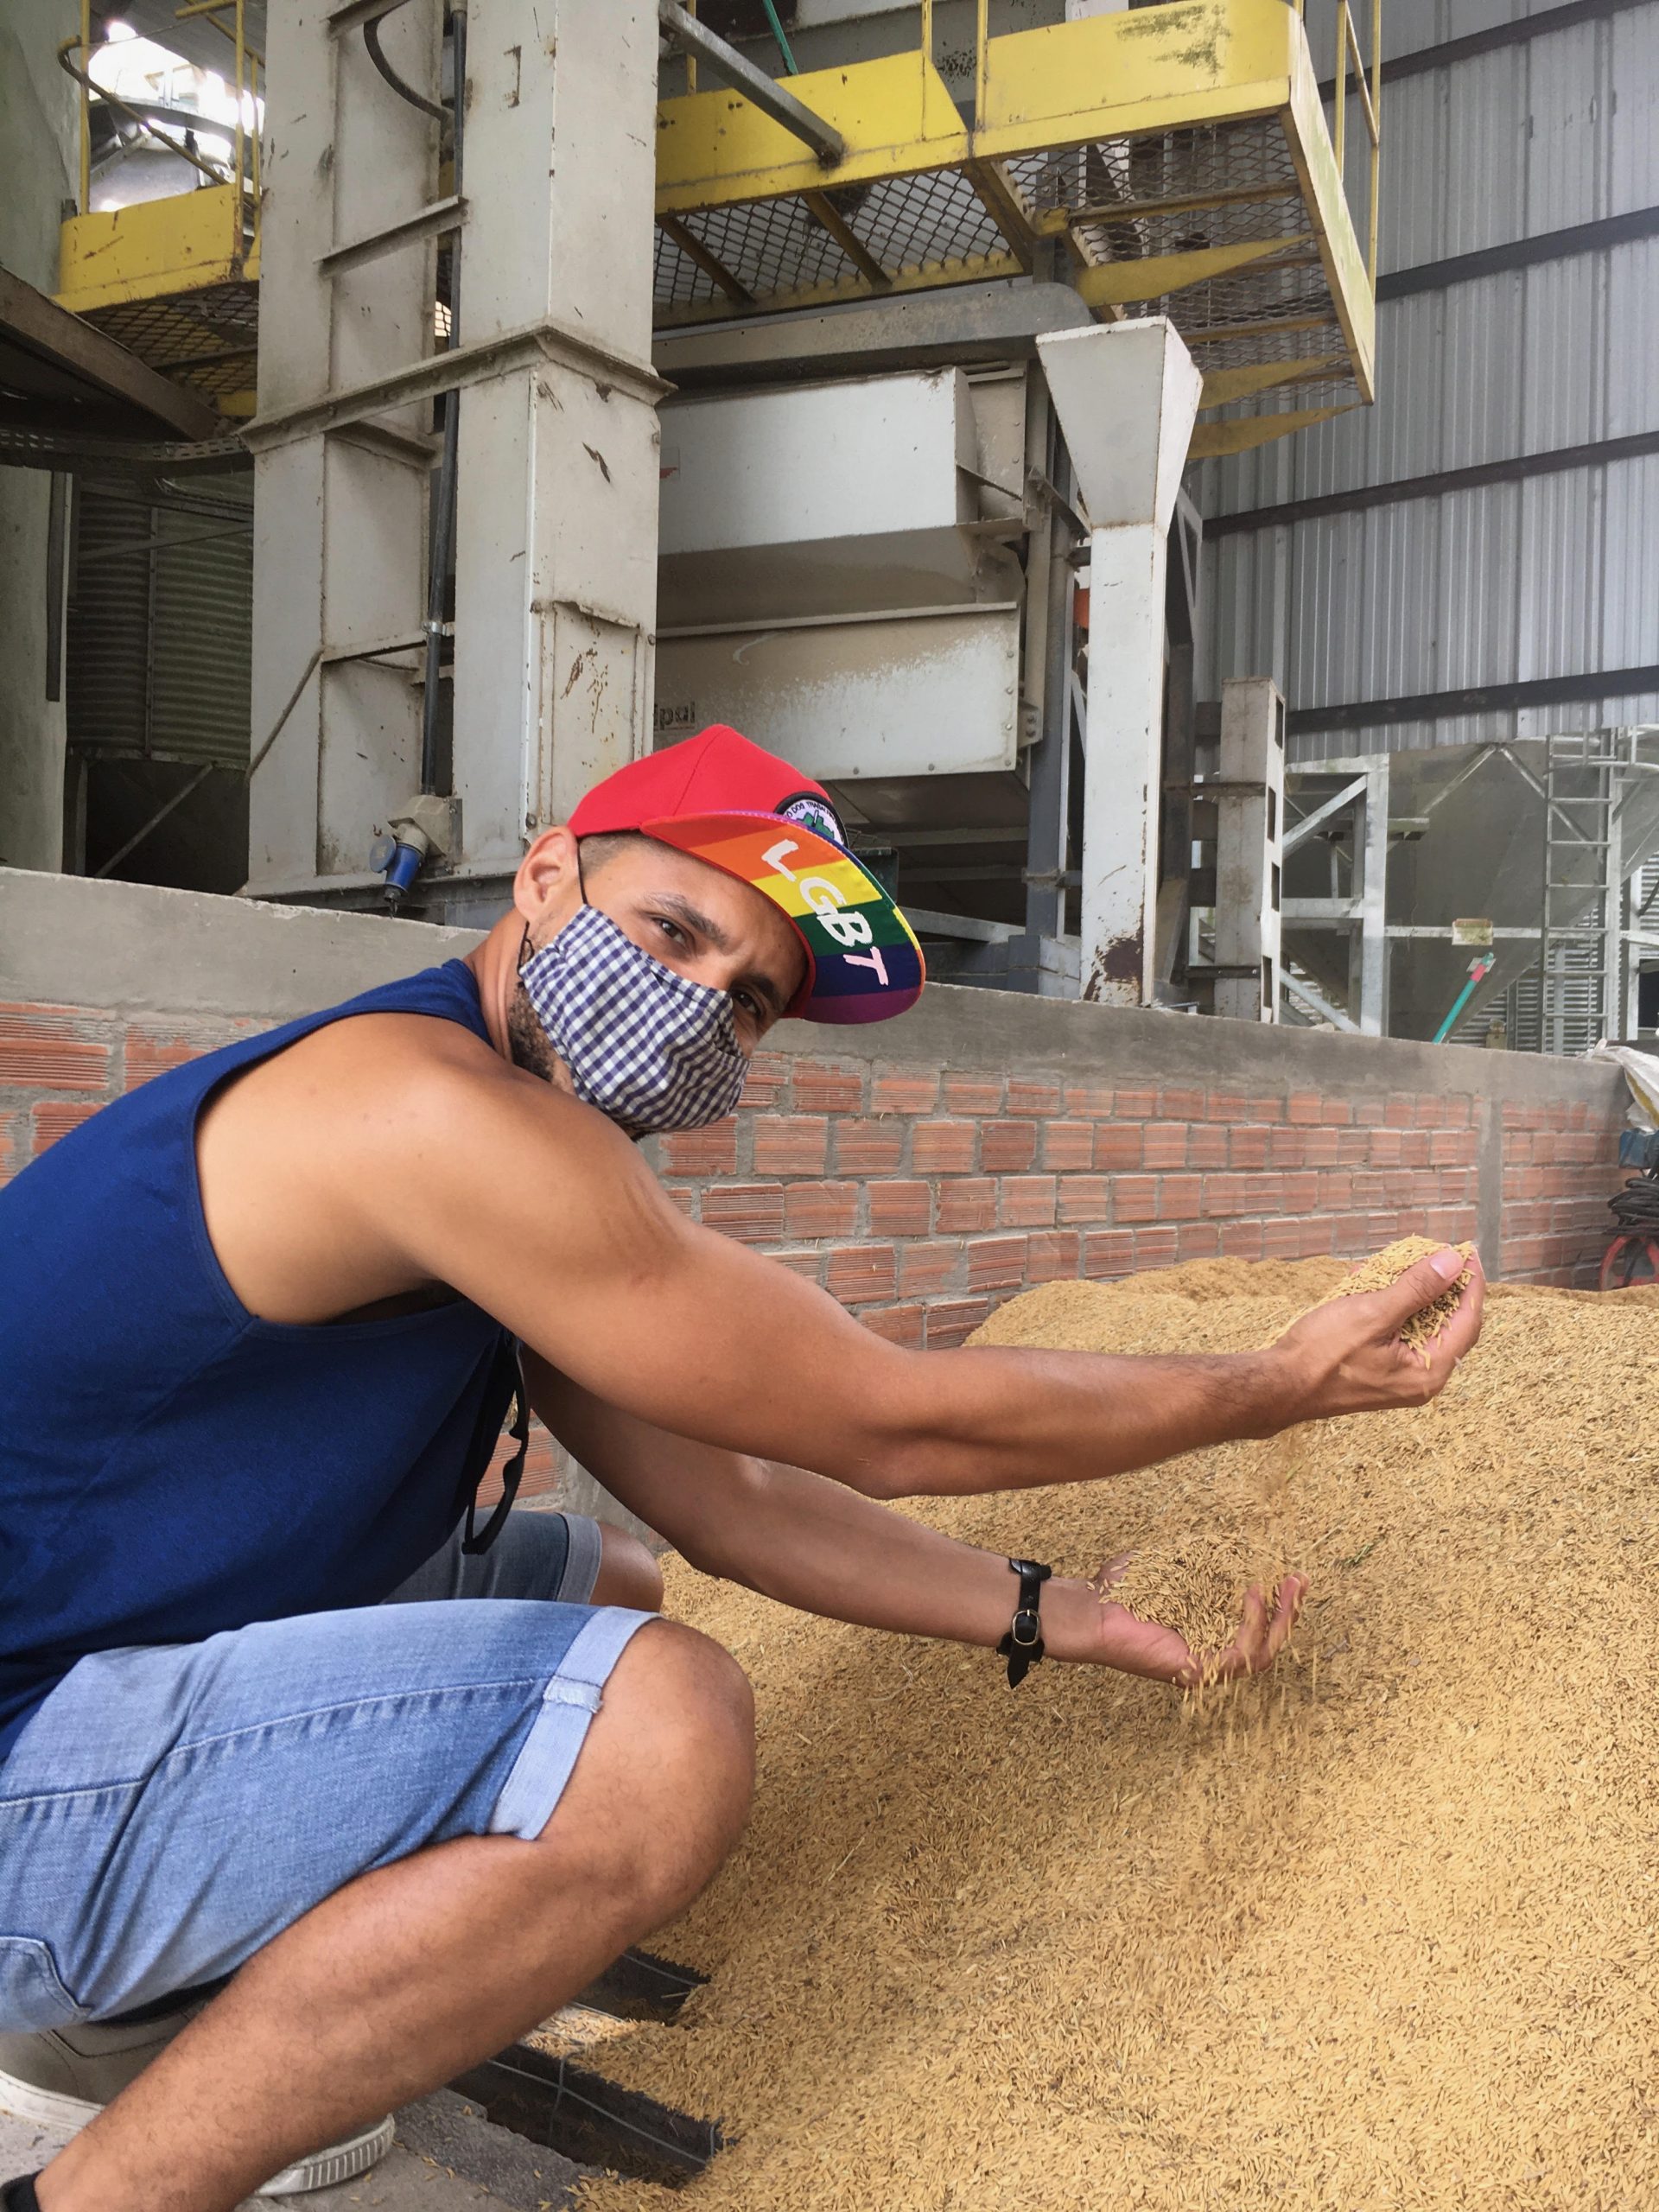 MST processing factory for agroecologically grown rice from their settlements in Porto Allegre